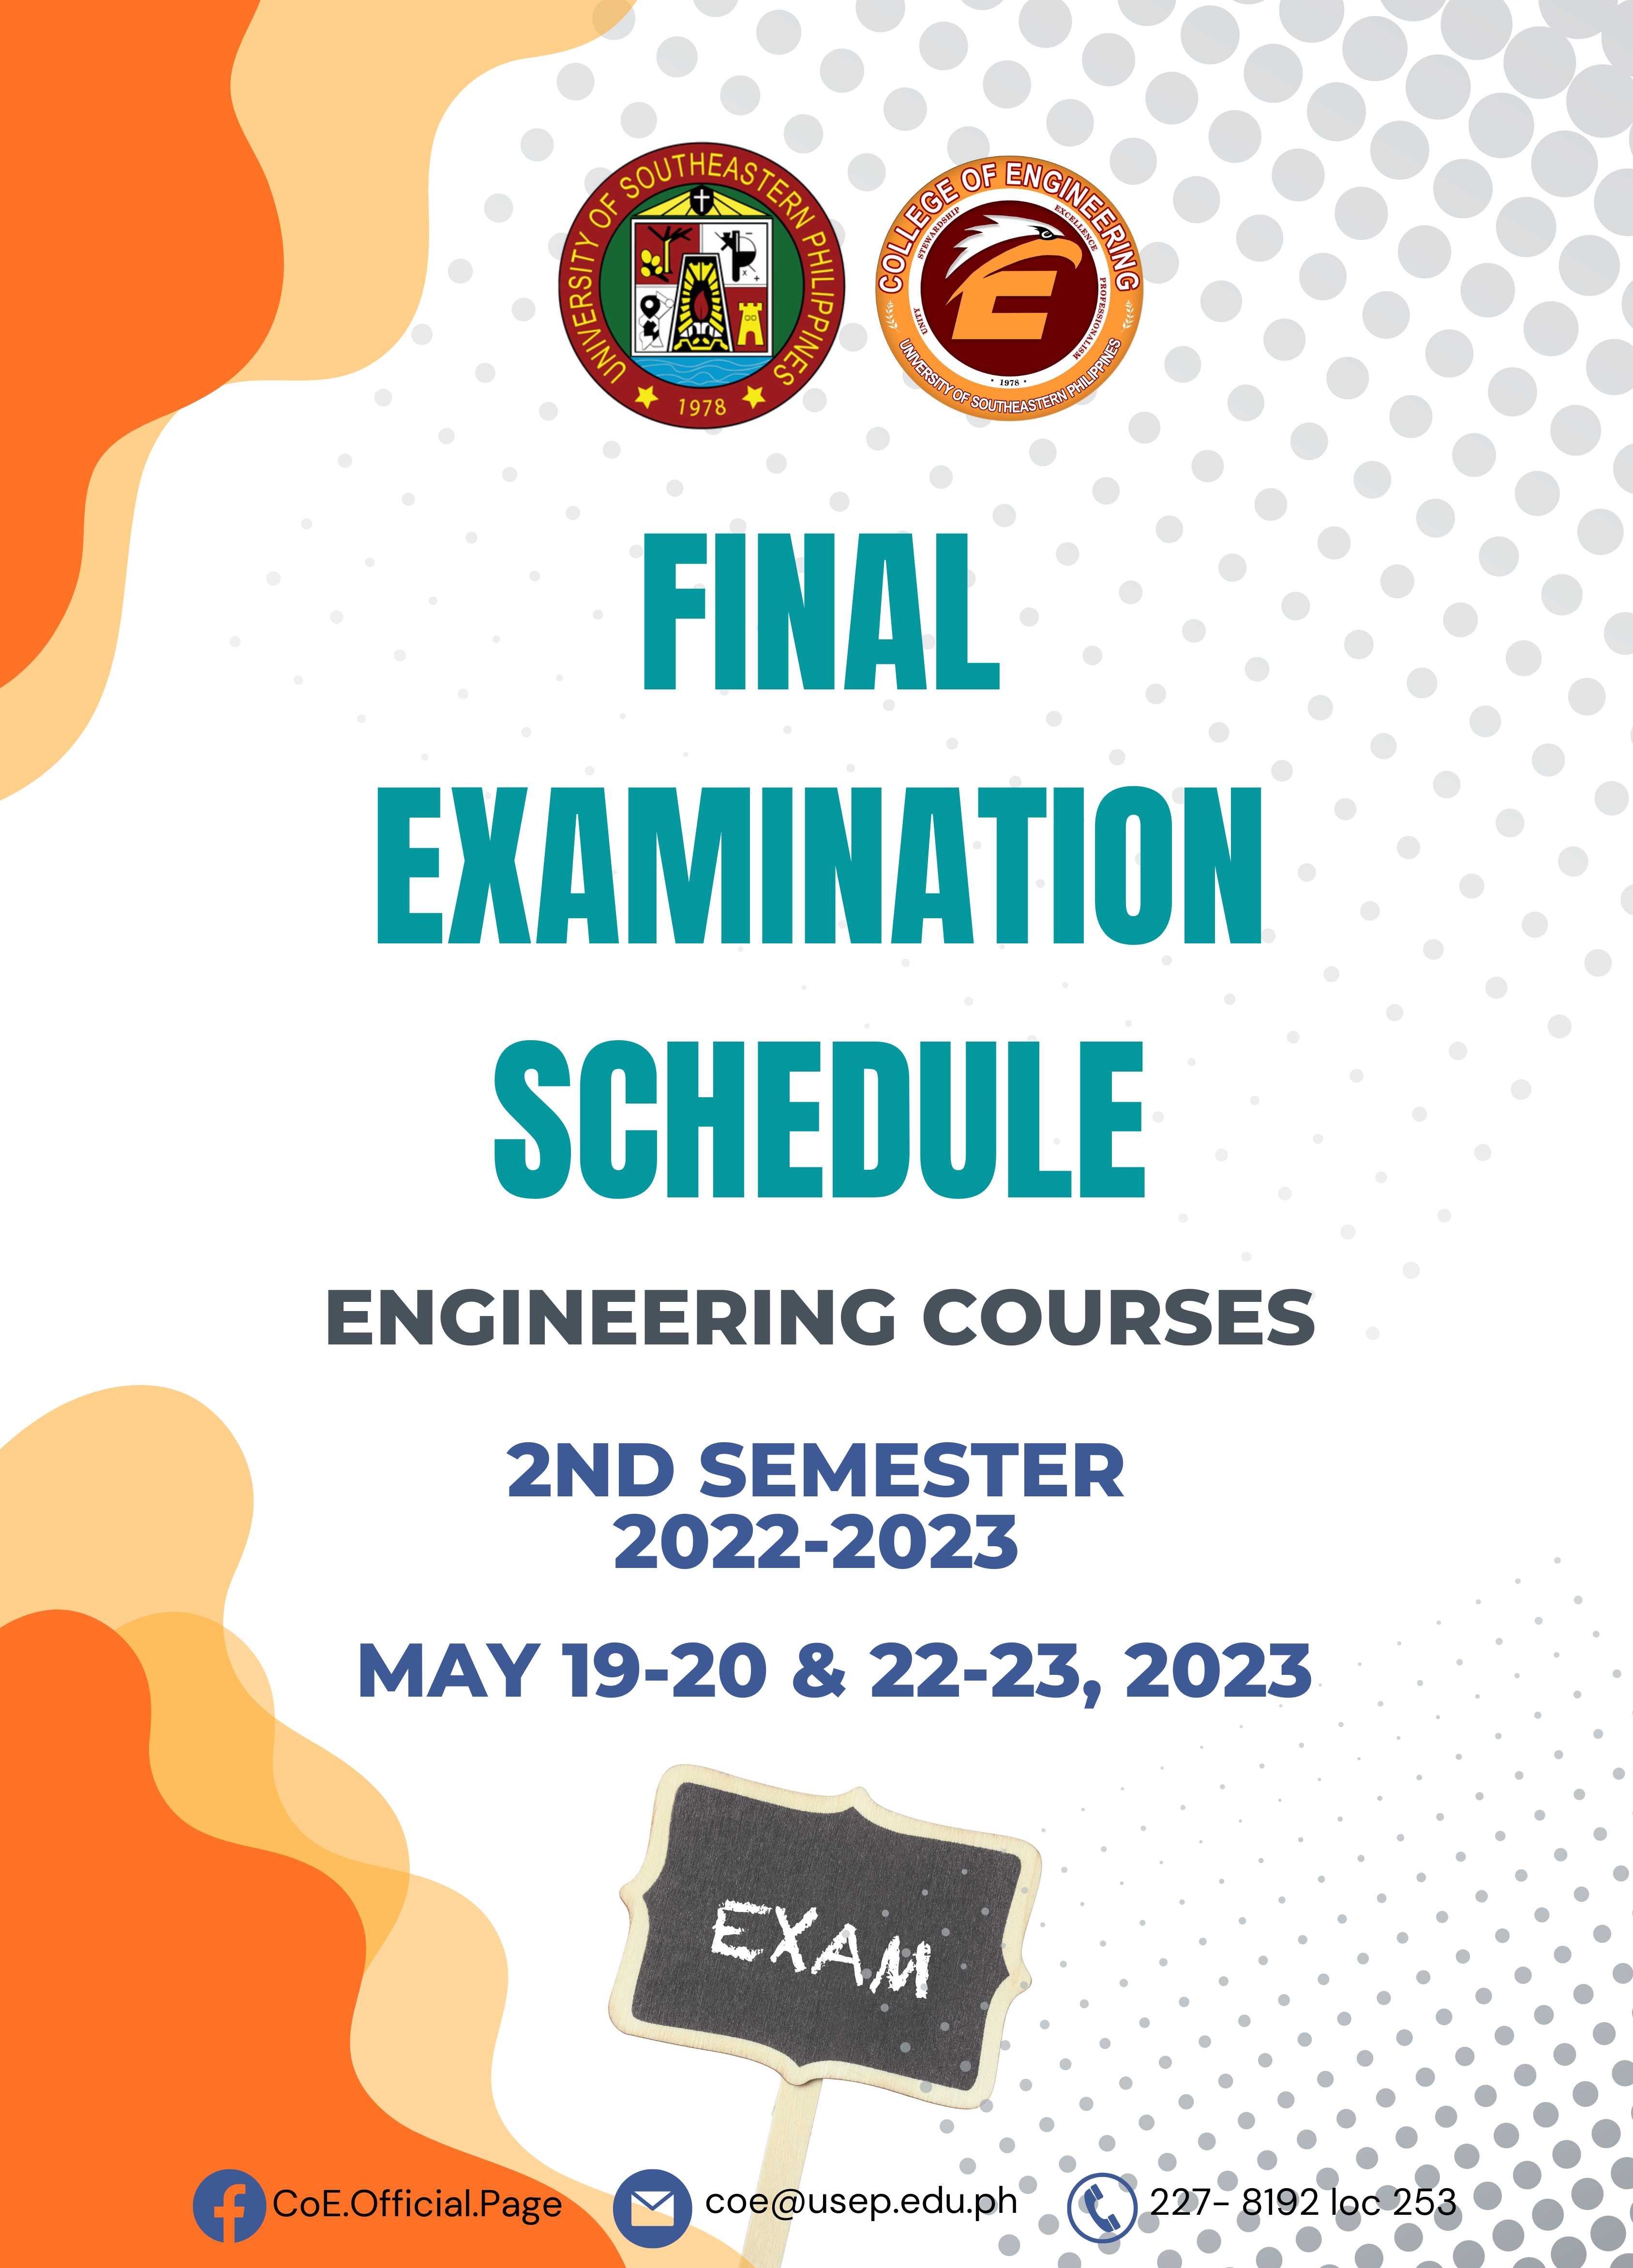 CoE releases Final Examination schedule for 2nd Semester AY 2022-2023